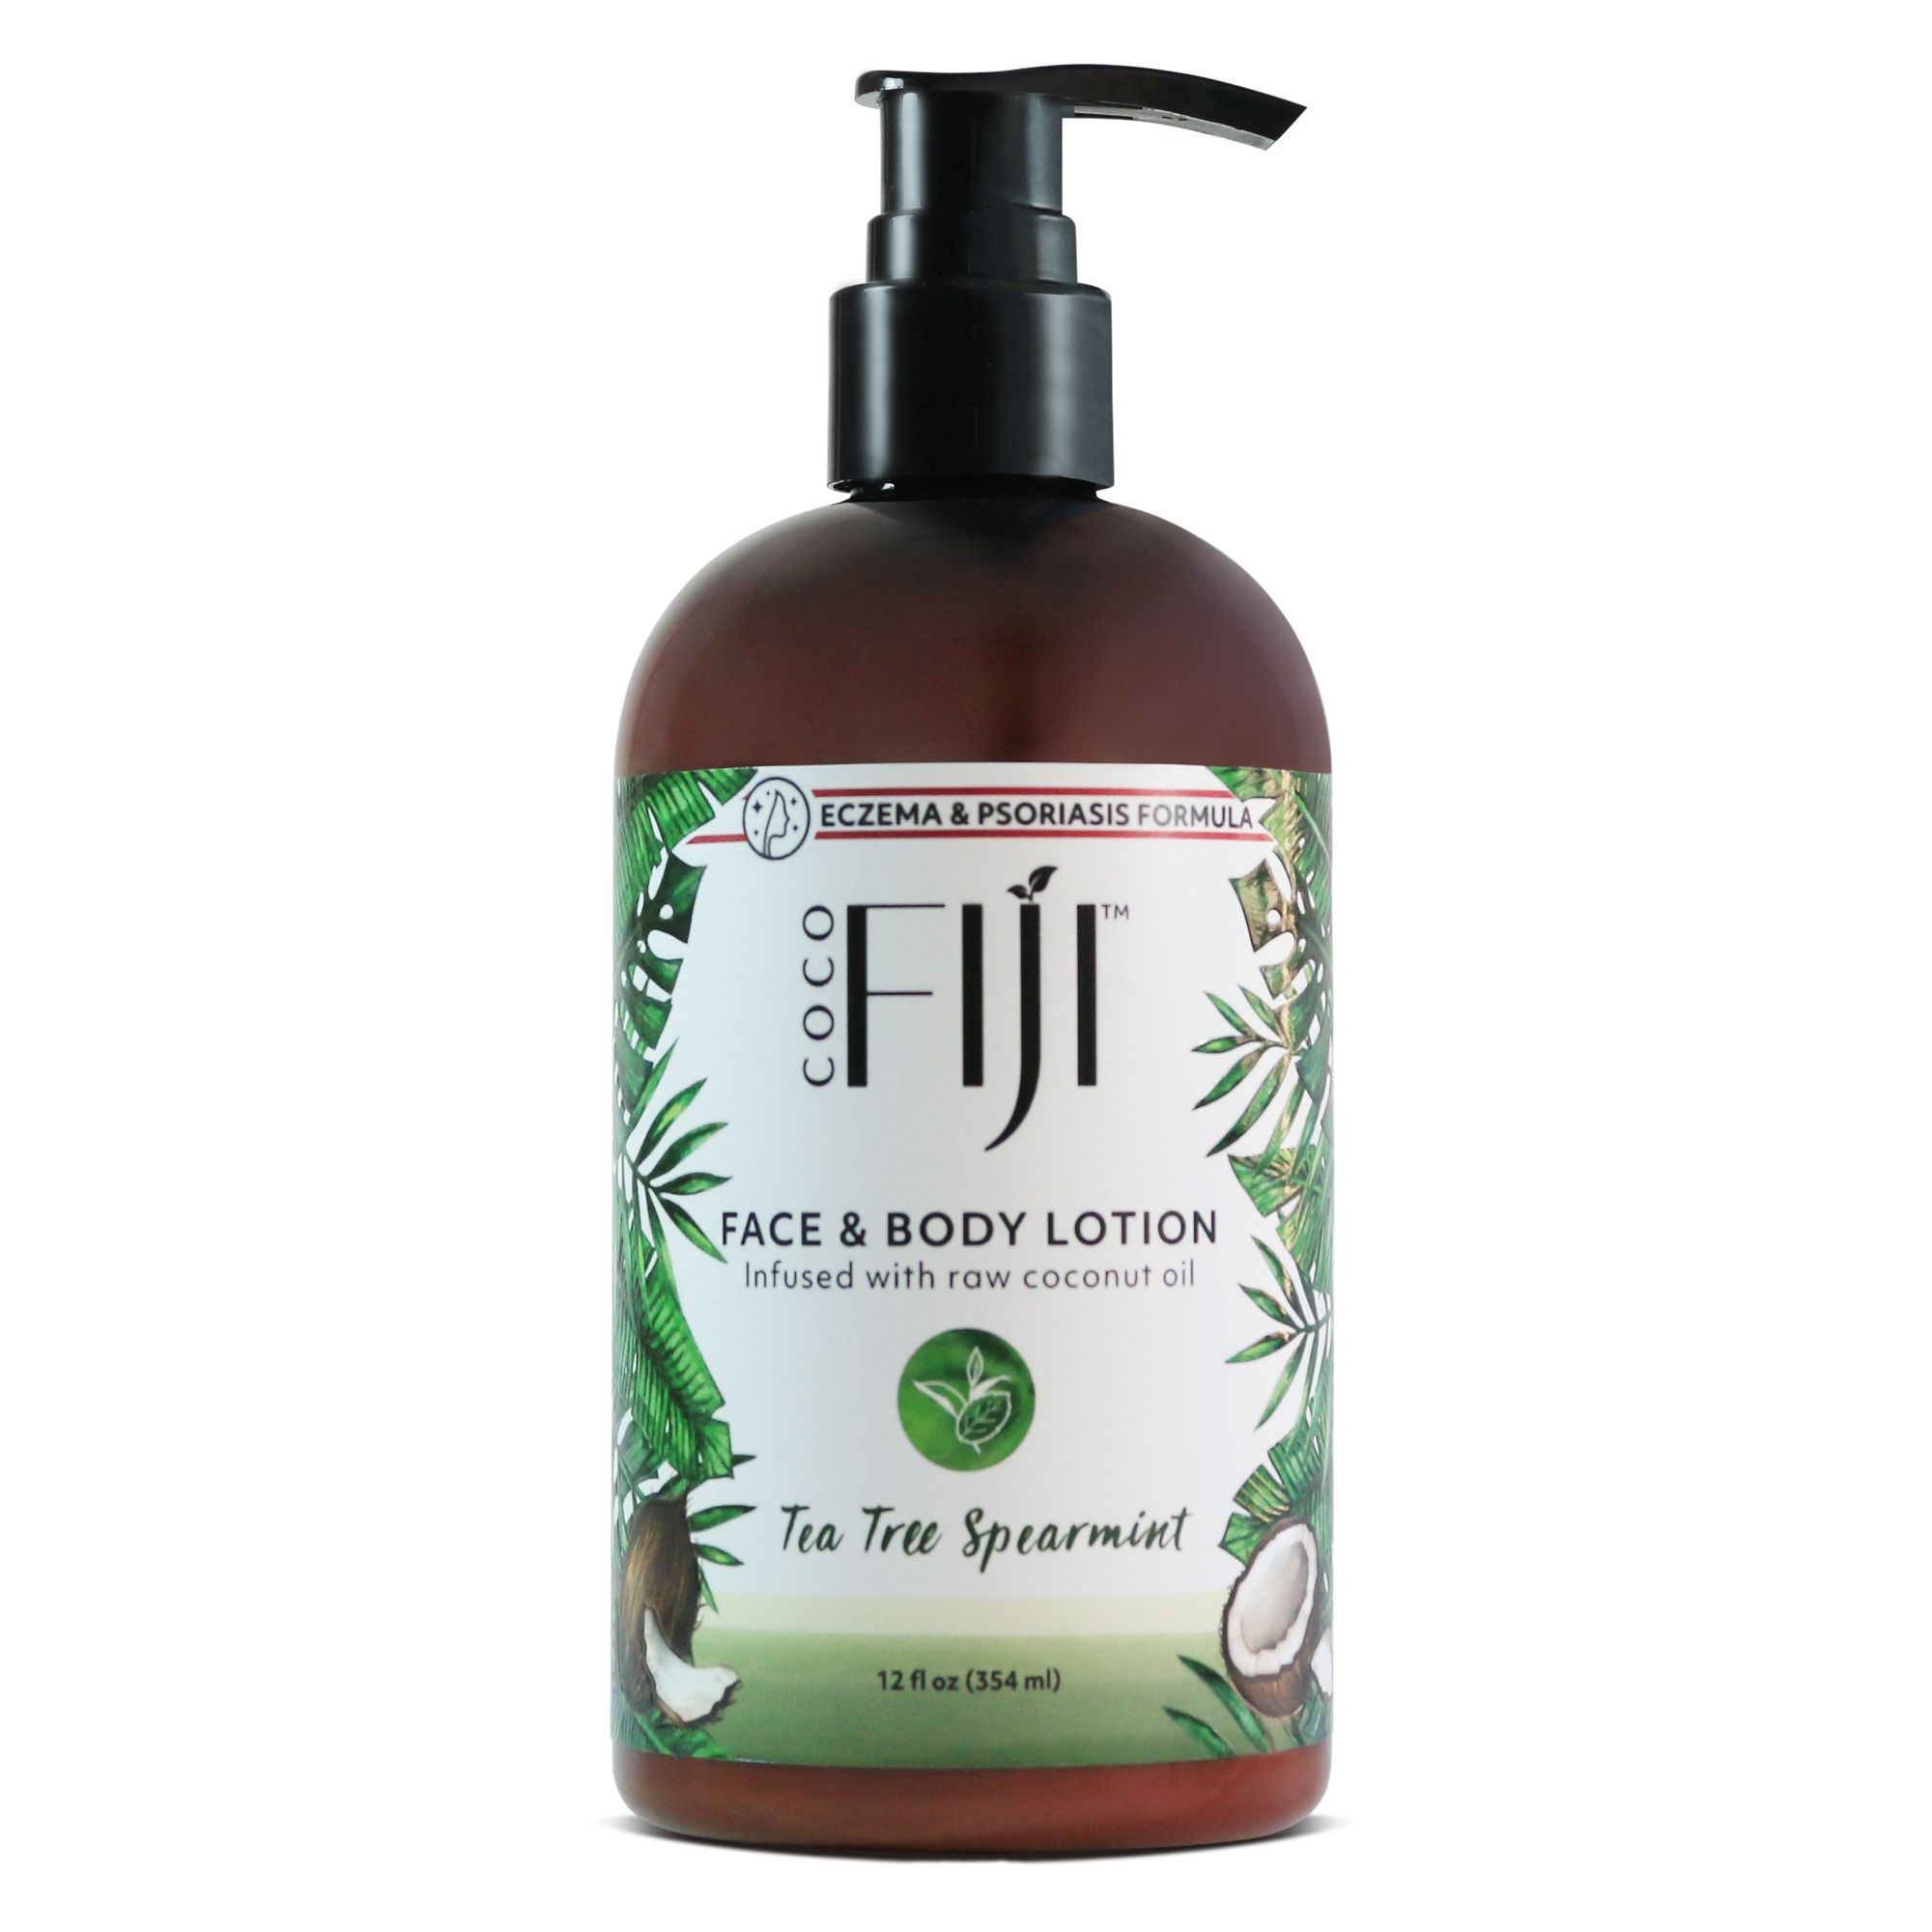 833884000091 12 Oz Infused Face & Body Lotion With Raw Coconut Oil, Tea Tree Spearmint